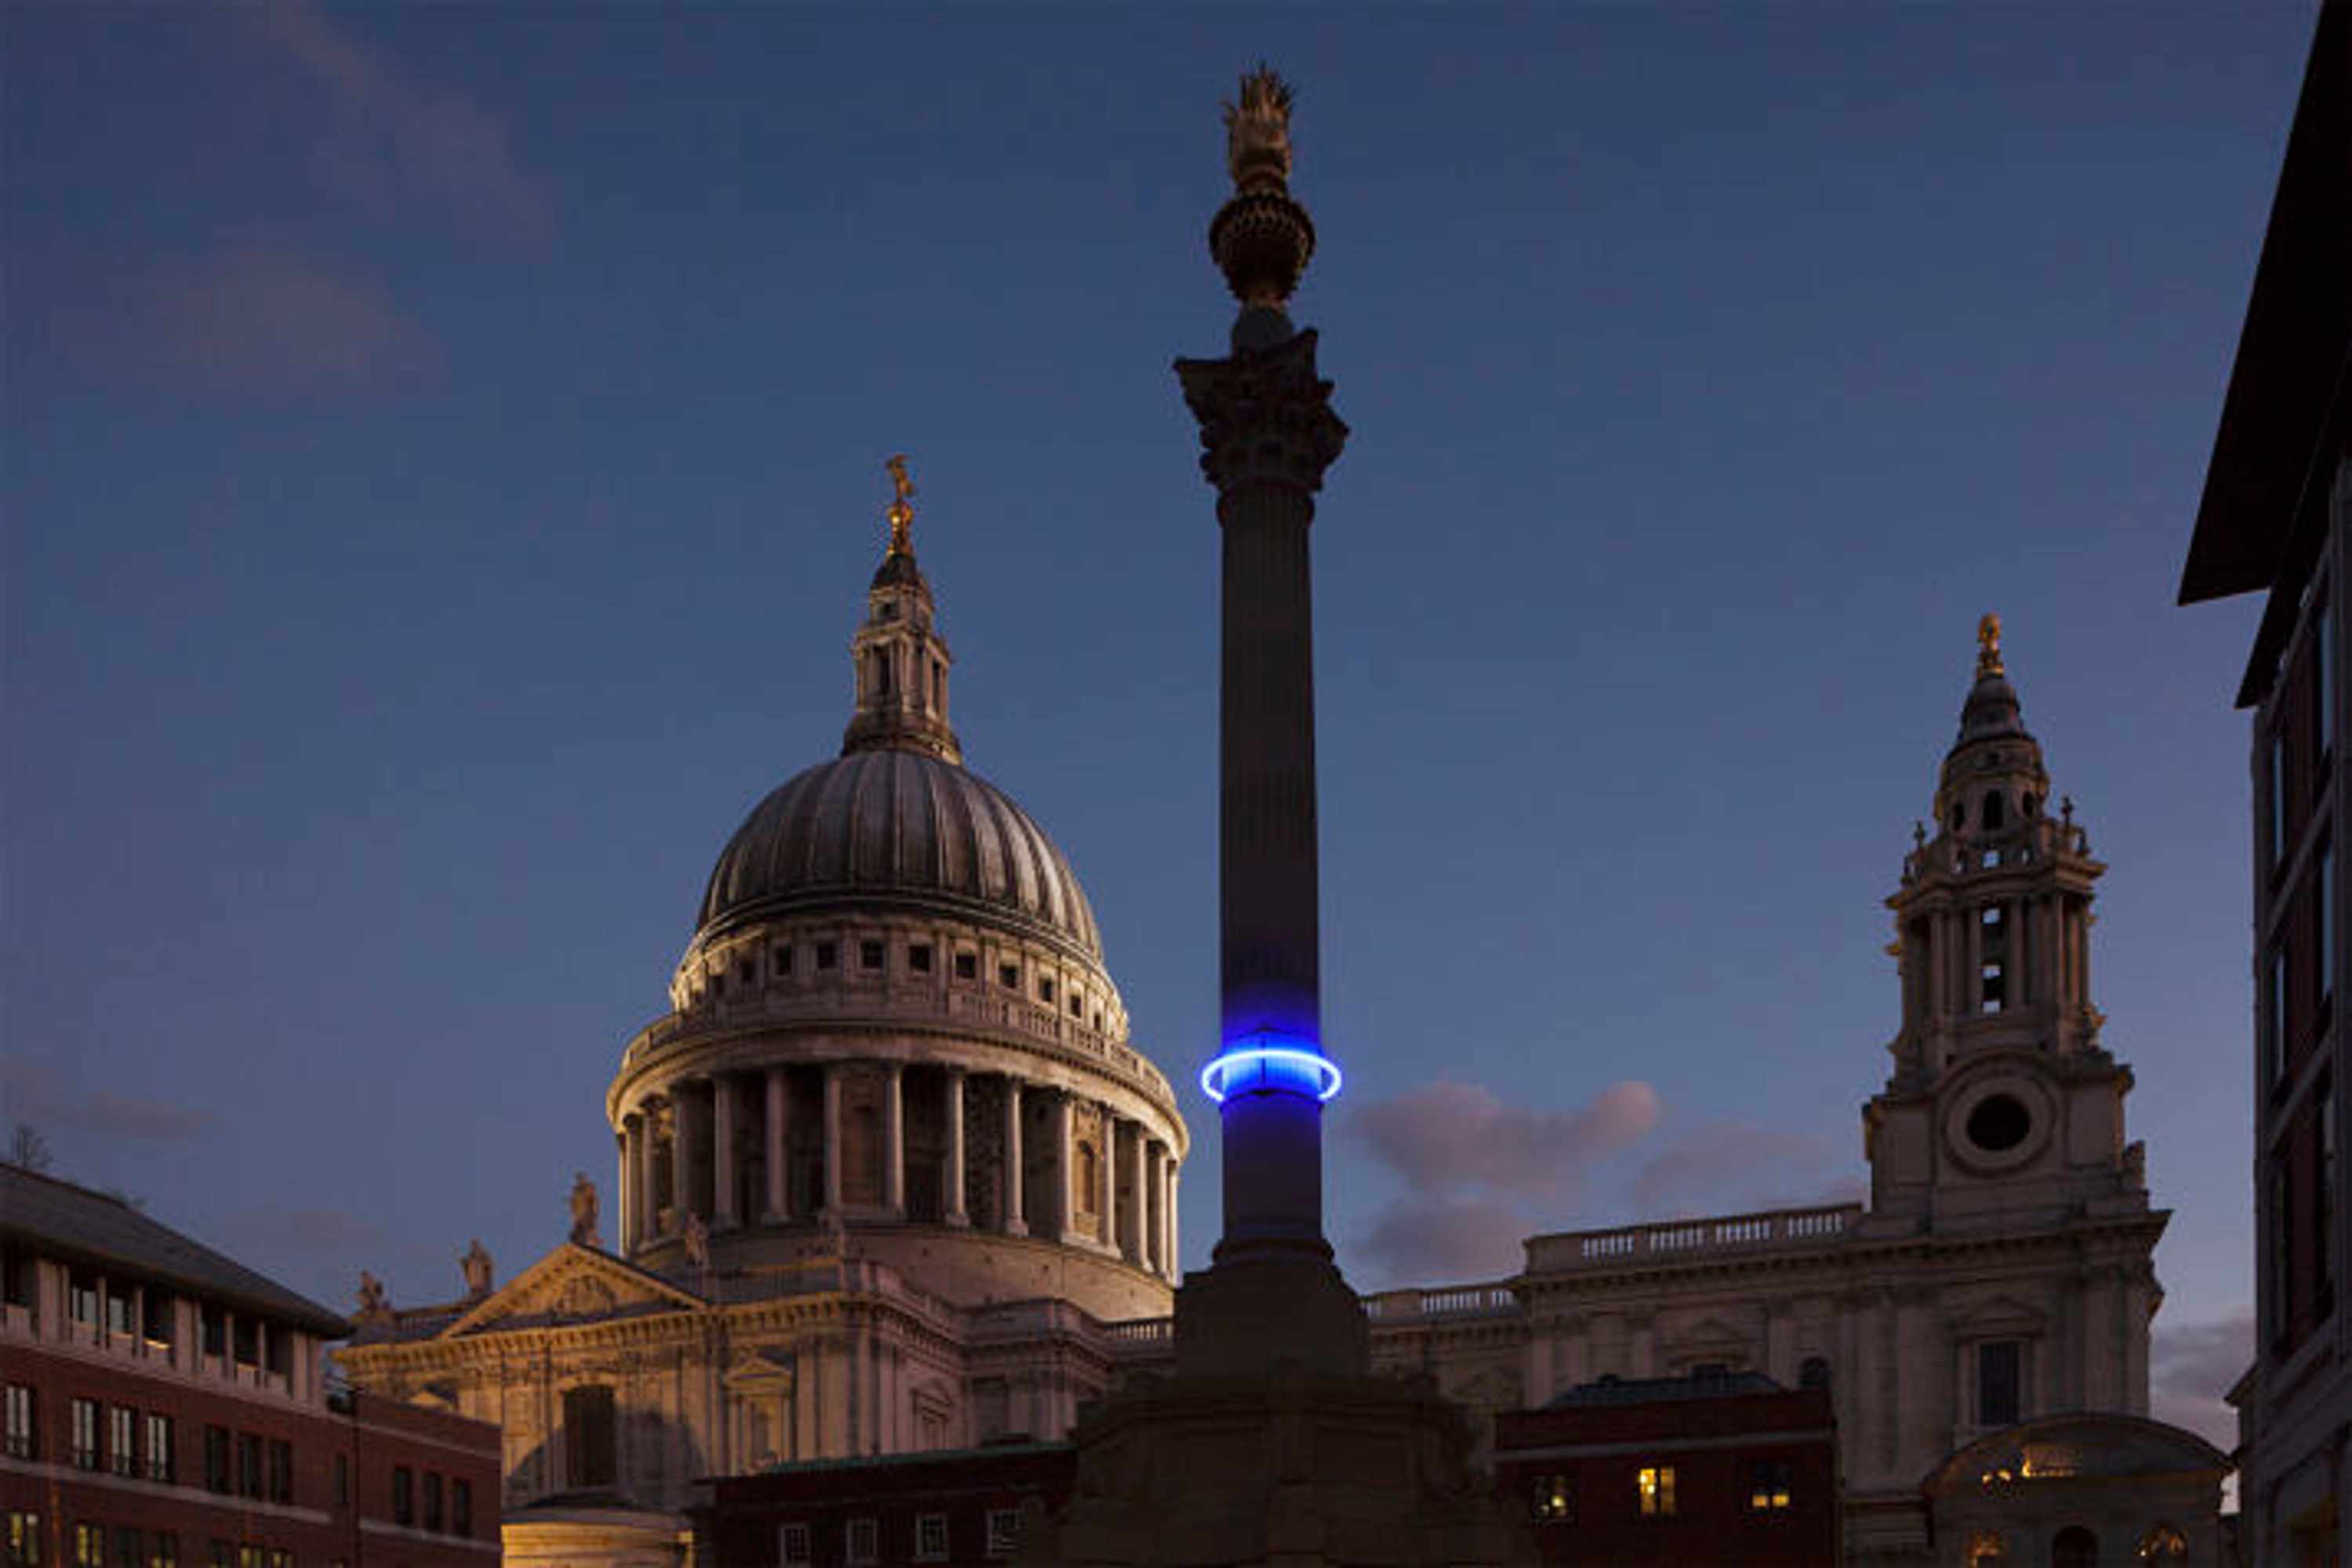 Plunge project by Arts Admin and artist Michael Pinsky. The monument in Paternoster Square has been fitted with a ring of blue light at 28m above sea levels to indicate where the sea levels will be in 1000 years time if we, the human race, continue our CO2 emmissions at current rate. An estimated hight of raised seal levels will be 28m, based on current available science. 3 monuments in London have been fitted with a ring of light at 28 m above sea levels, one is on the Duke of York Monument, another the monument in Paternoster Square and the third on the monument in Sevel Dials in Covent Garden.